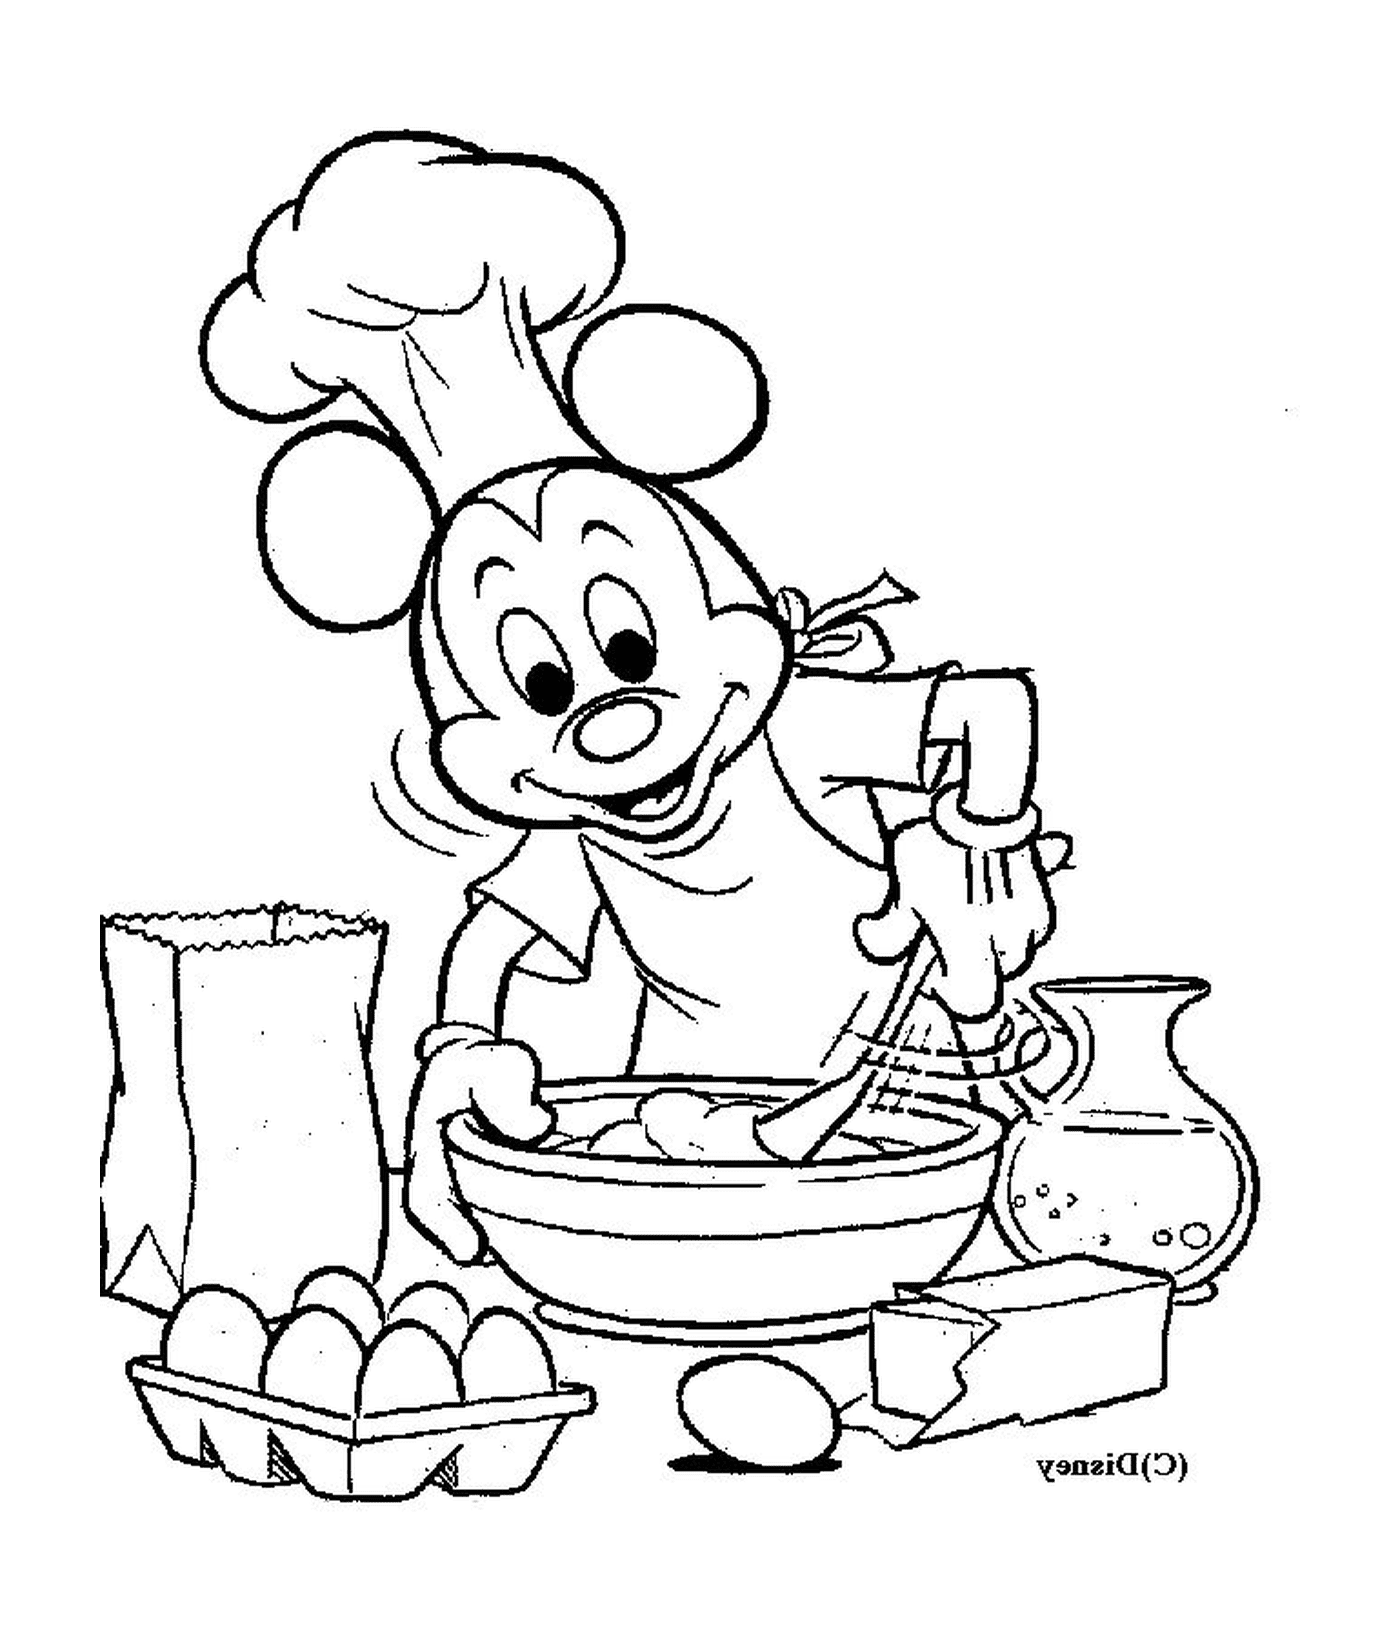  Mickey Mouse chef mixing a bowl of food 